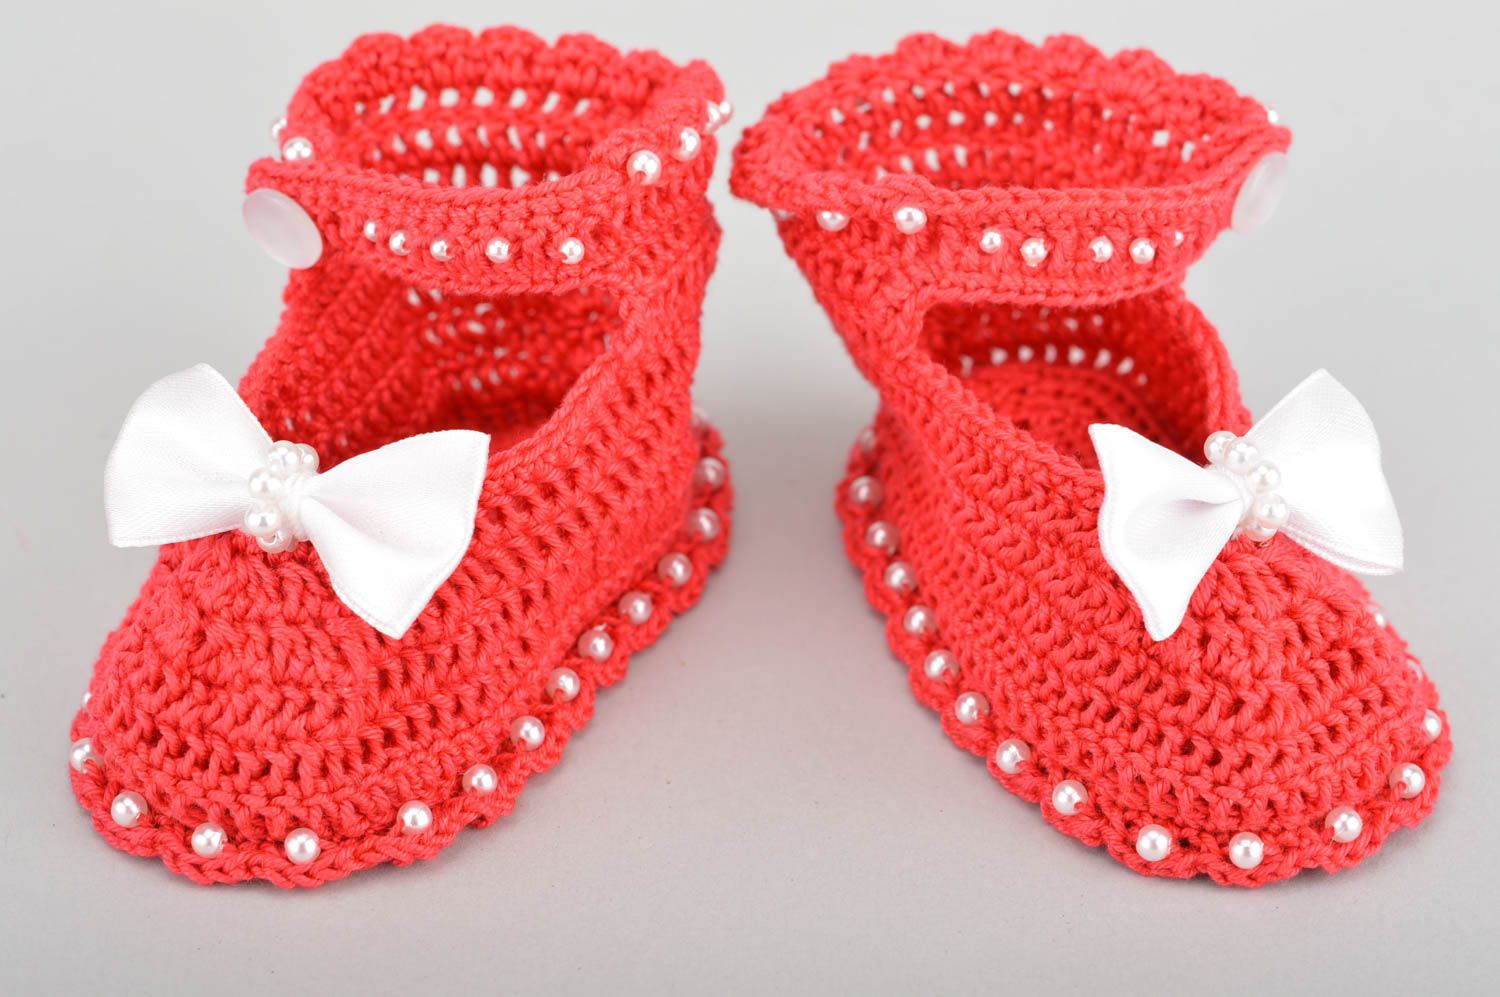 Handmade designer cotton crocheted bright red baby shoes with white bows photo 2